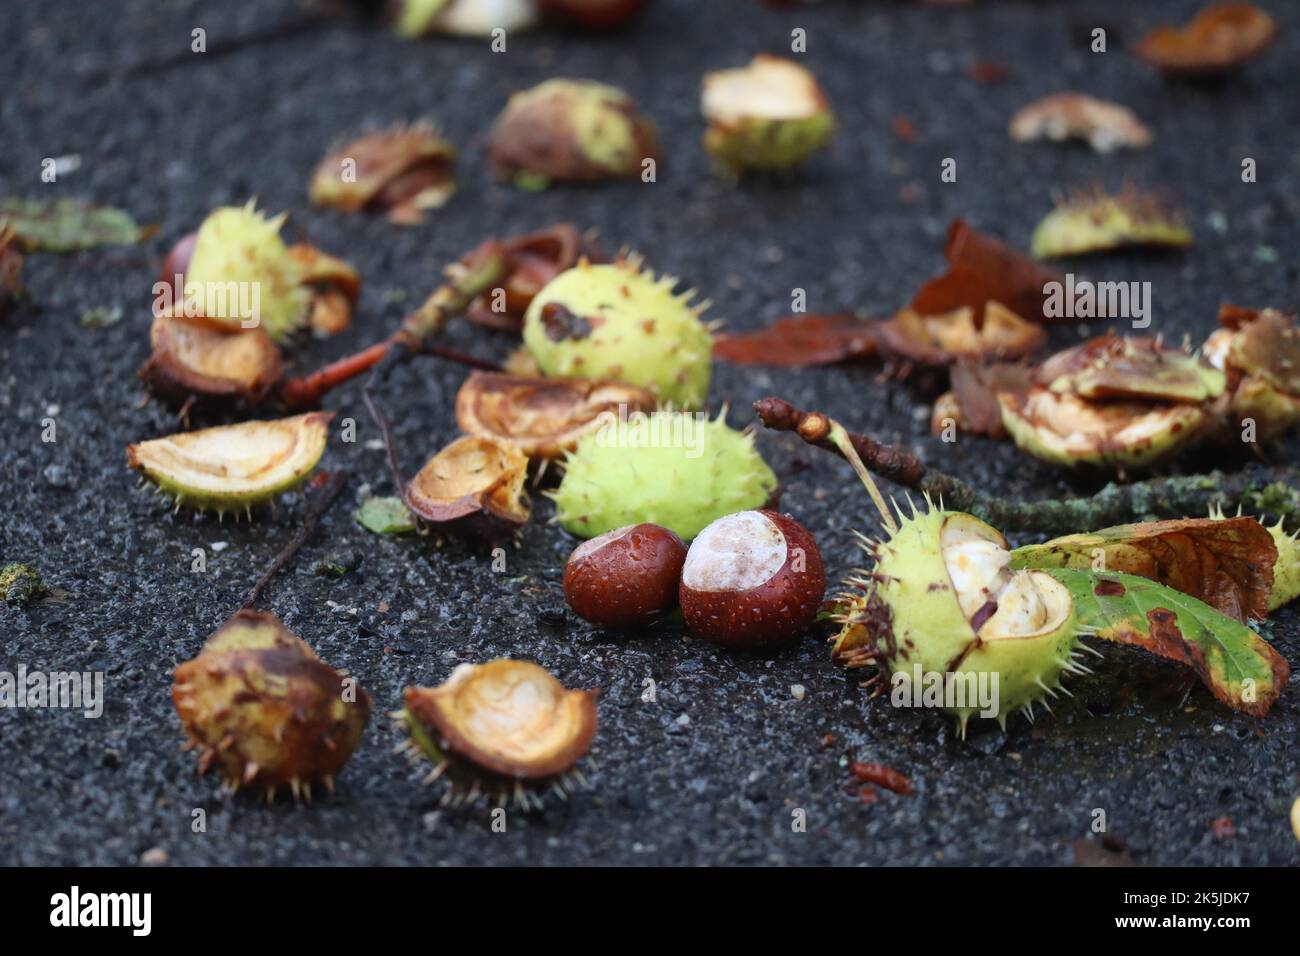 burst Chestnuts lie on a Road Stock Photo